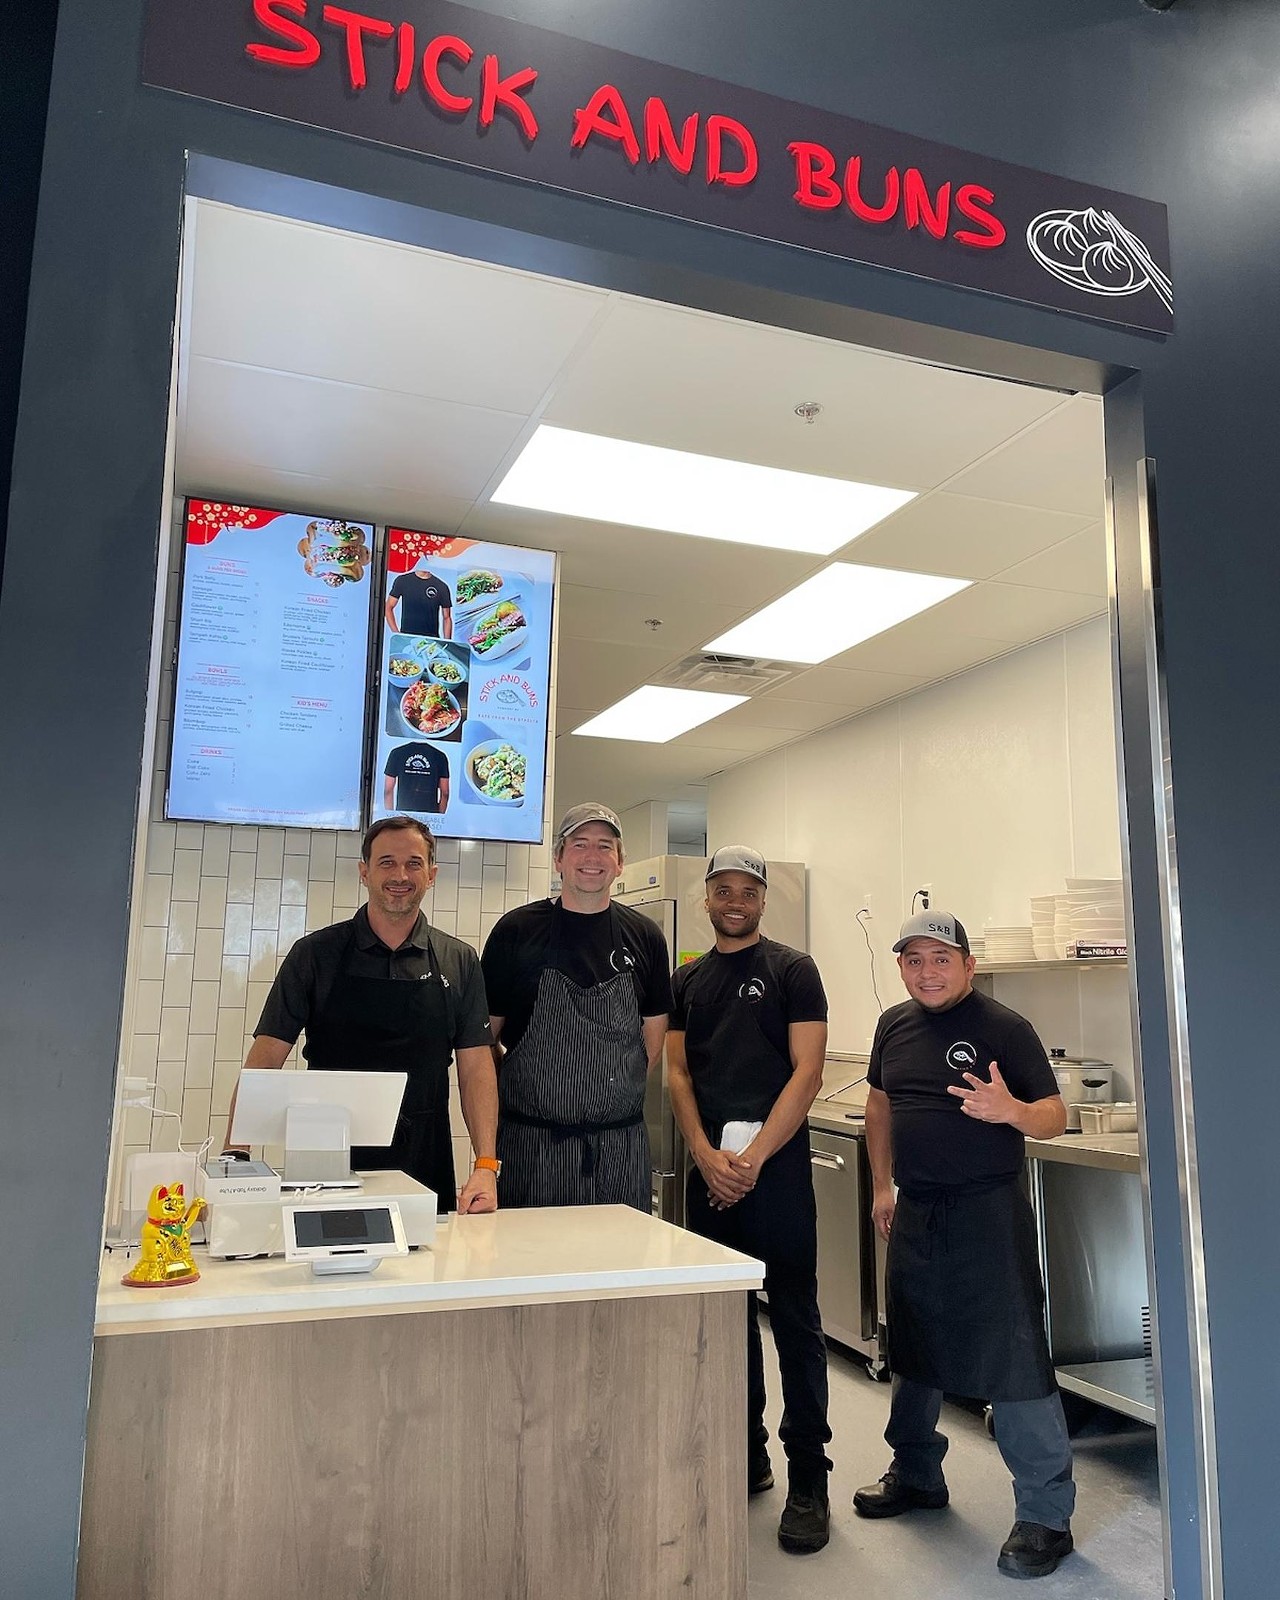 Stick and Buns (Located in Galley on the Levee)
1 Levee Way, Newport
MENU: Bang Bang Shrimp for $17
Korean Fried Wings for $12
Pork Belly Bun for $6
Bulgogi for $18
Crispy Rice for $6